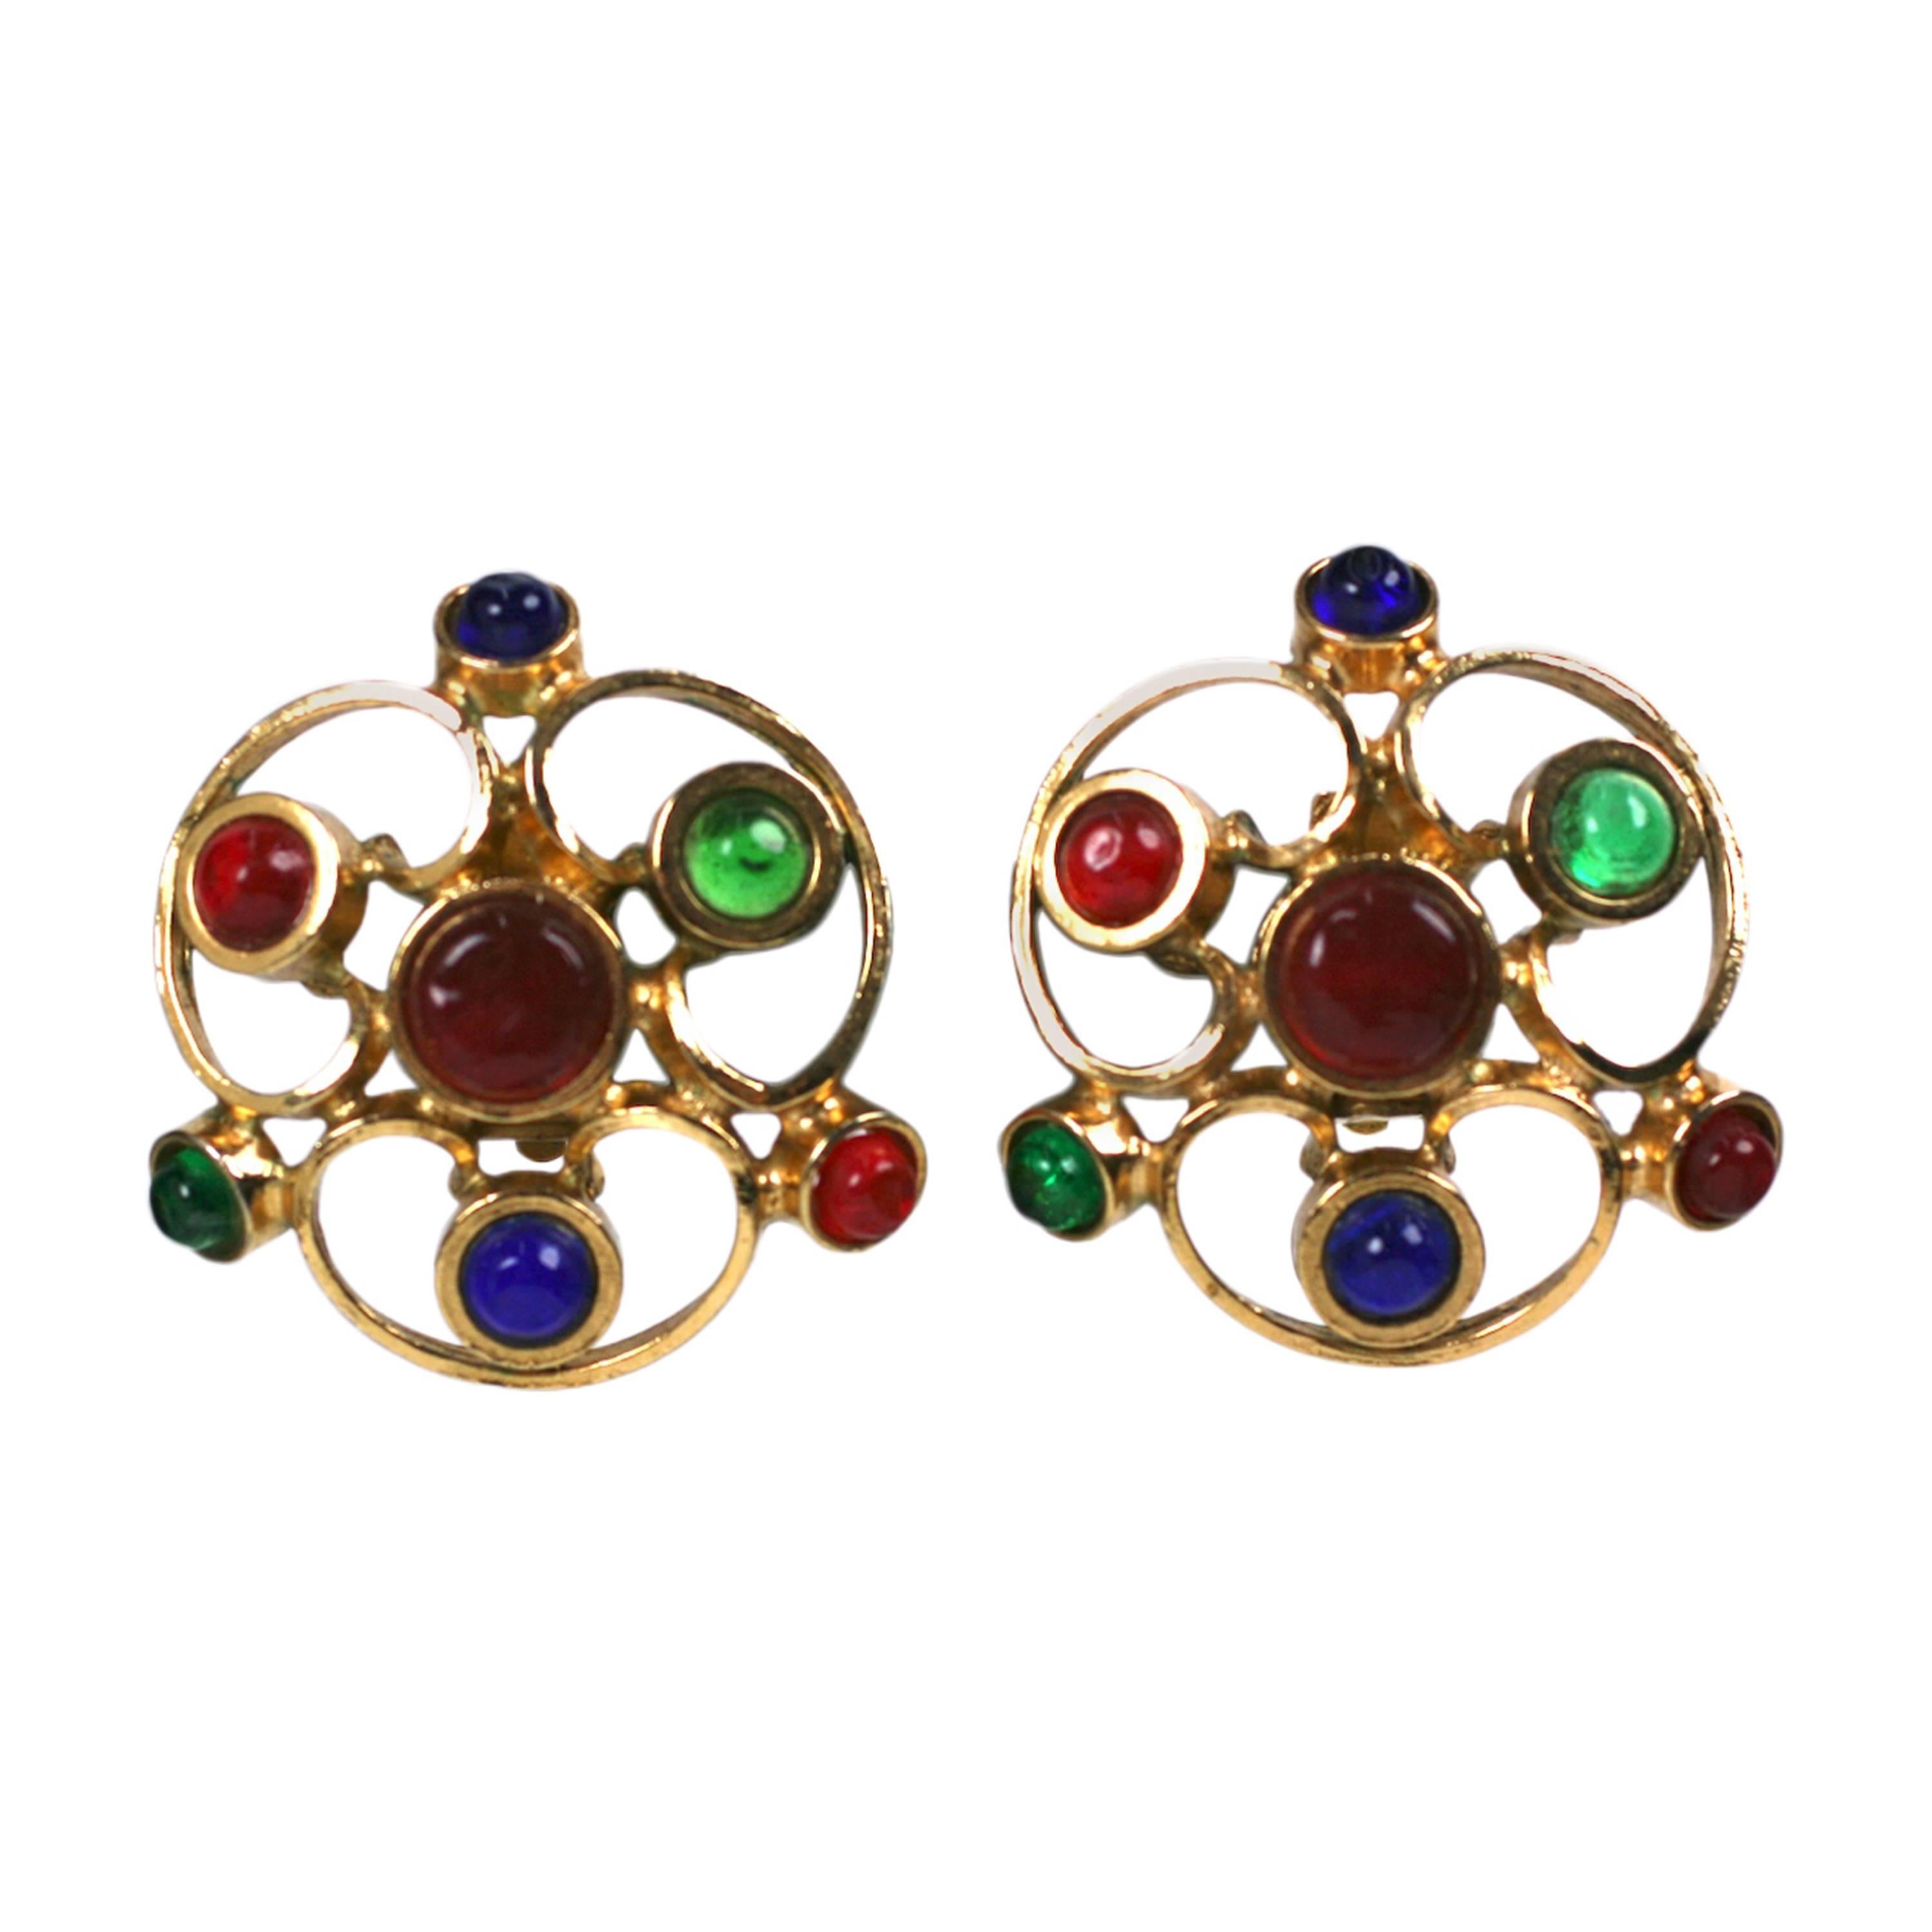  Maison Gripoix for Chanel Large  Medieval Trefoil  Poured Glass   Earclips For Sale